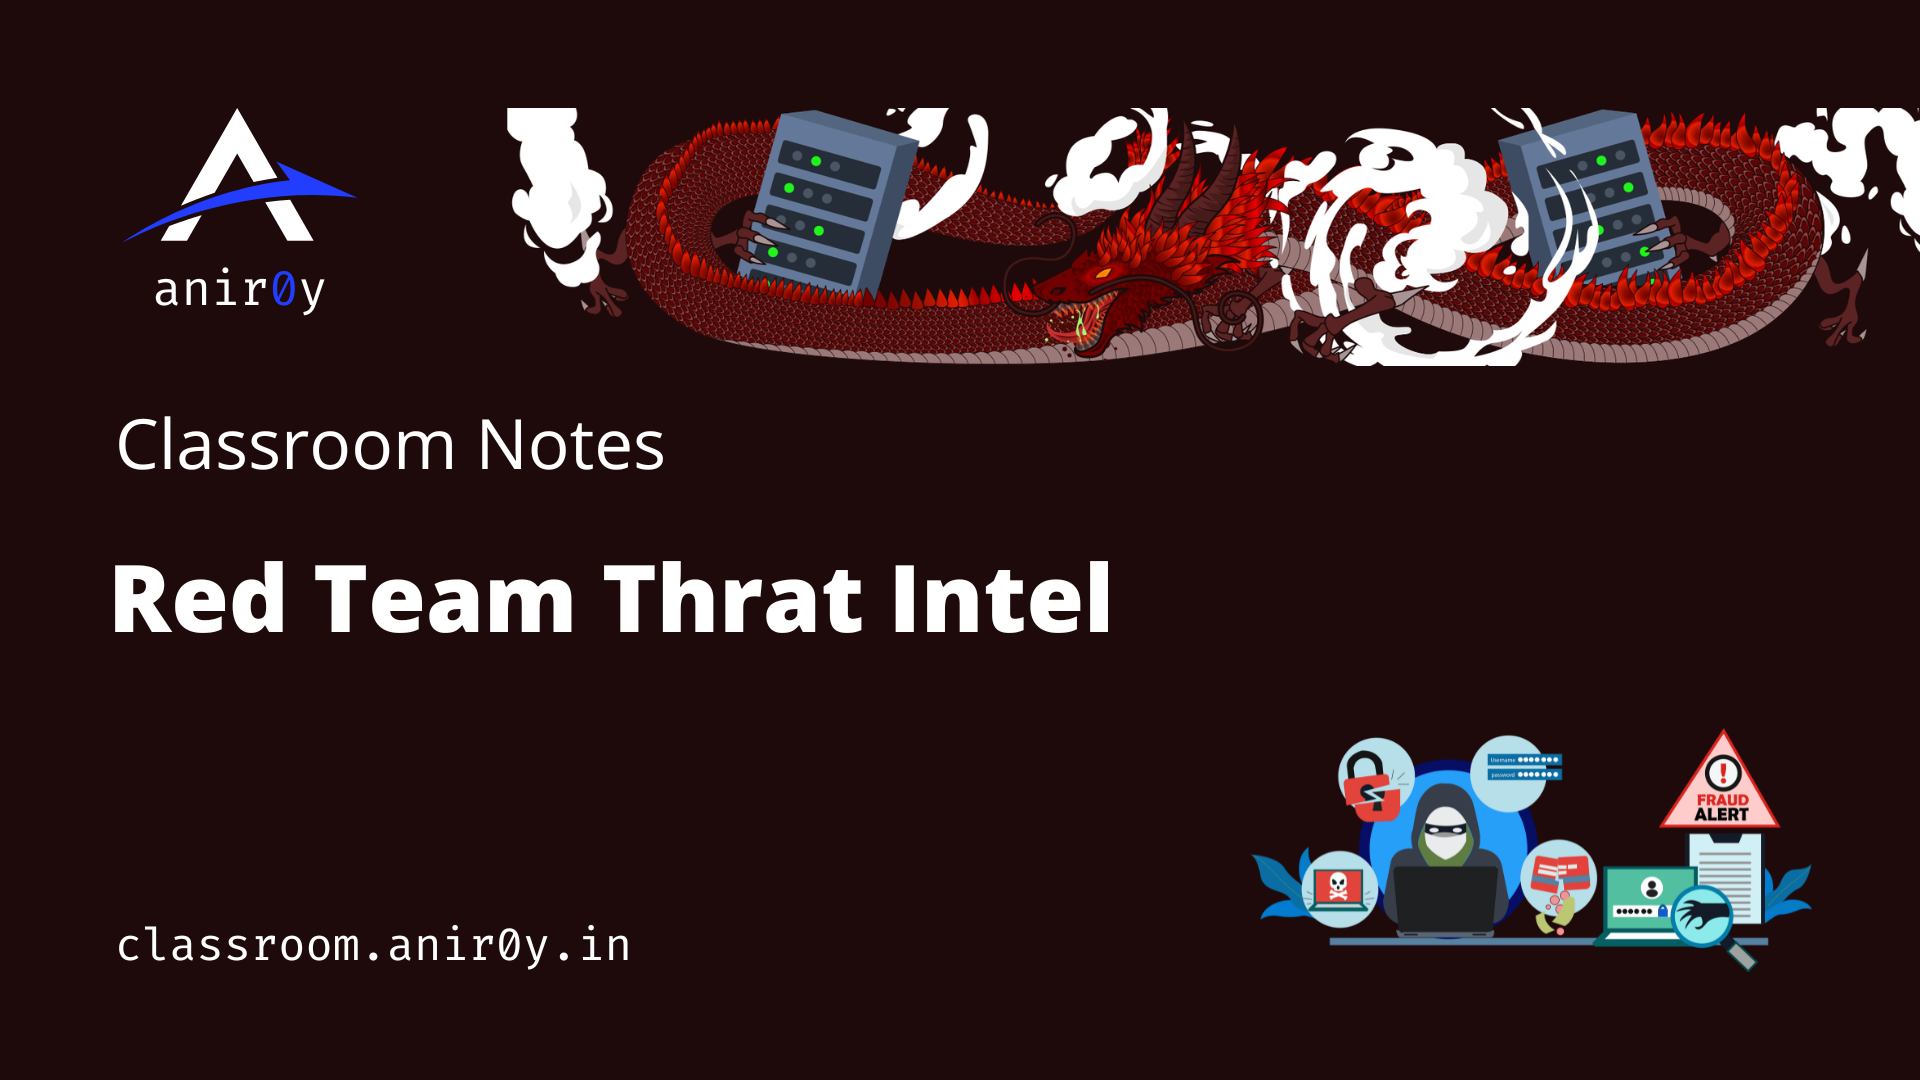 Try Hack Me Red Team Threat Intel